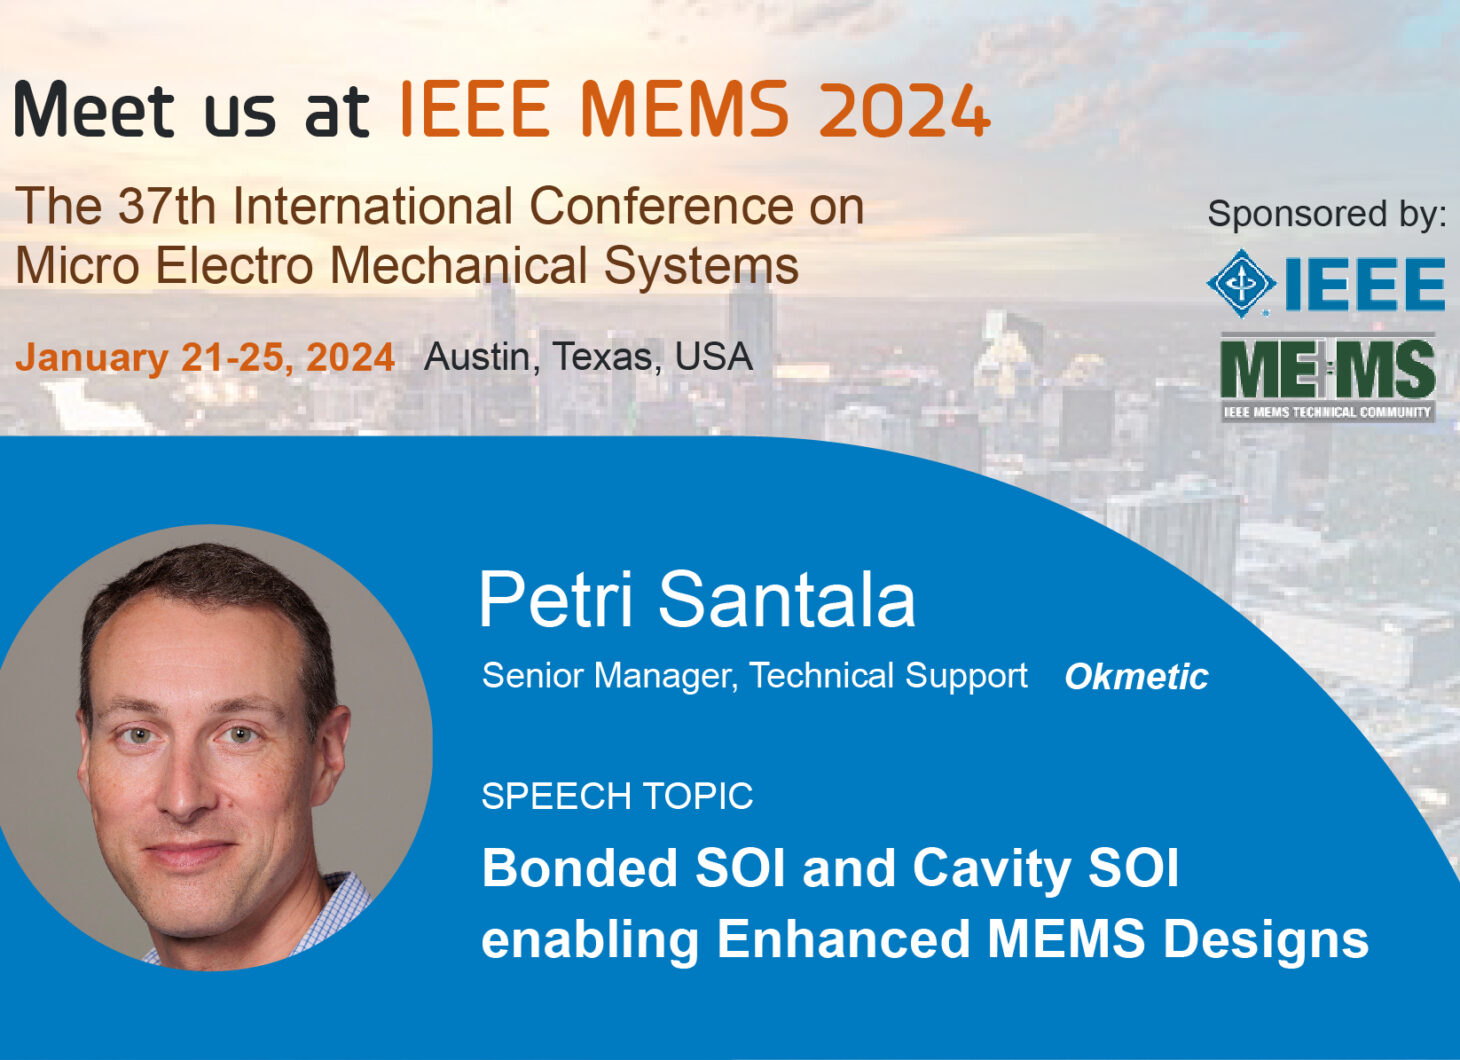 Okmetic is participating in the IEEE MEMS Conference 2024, to be held